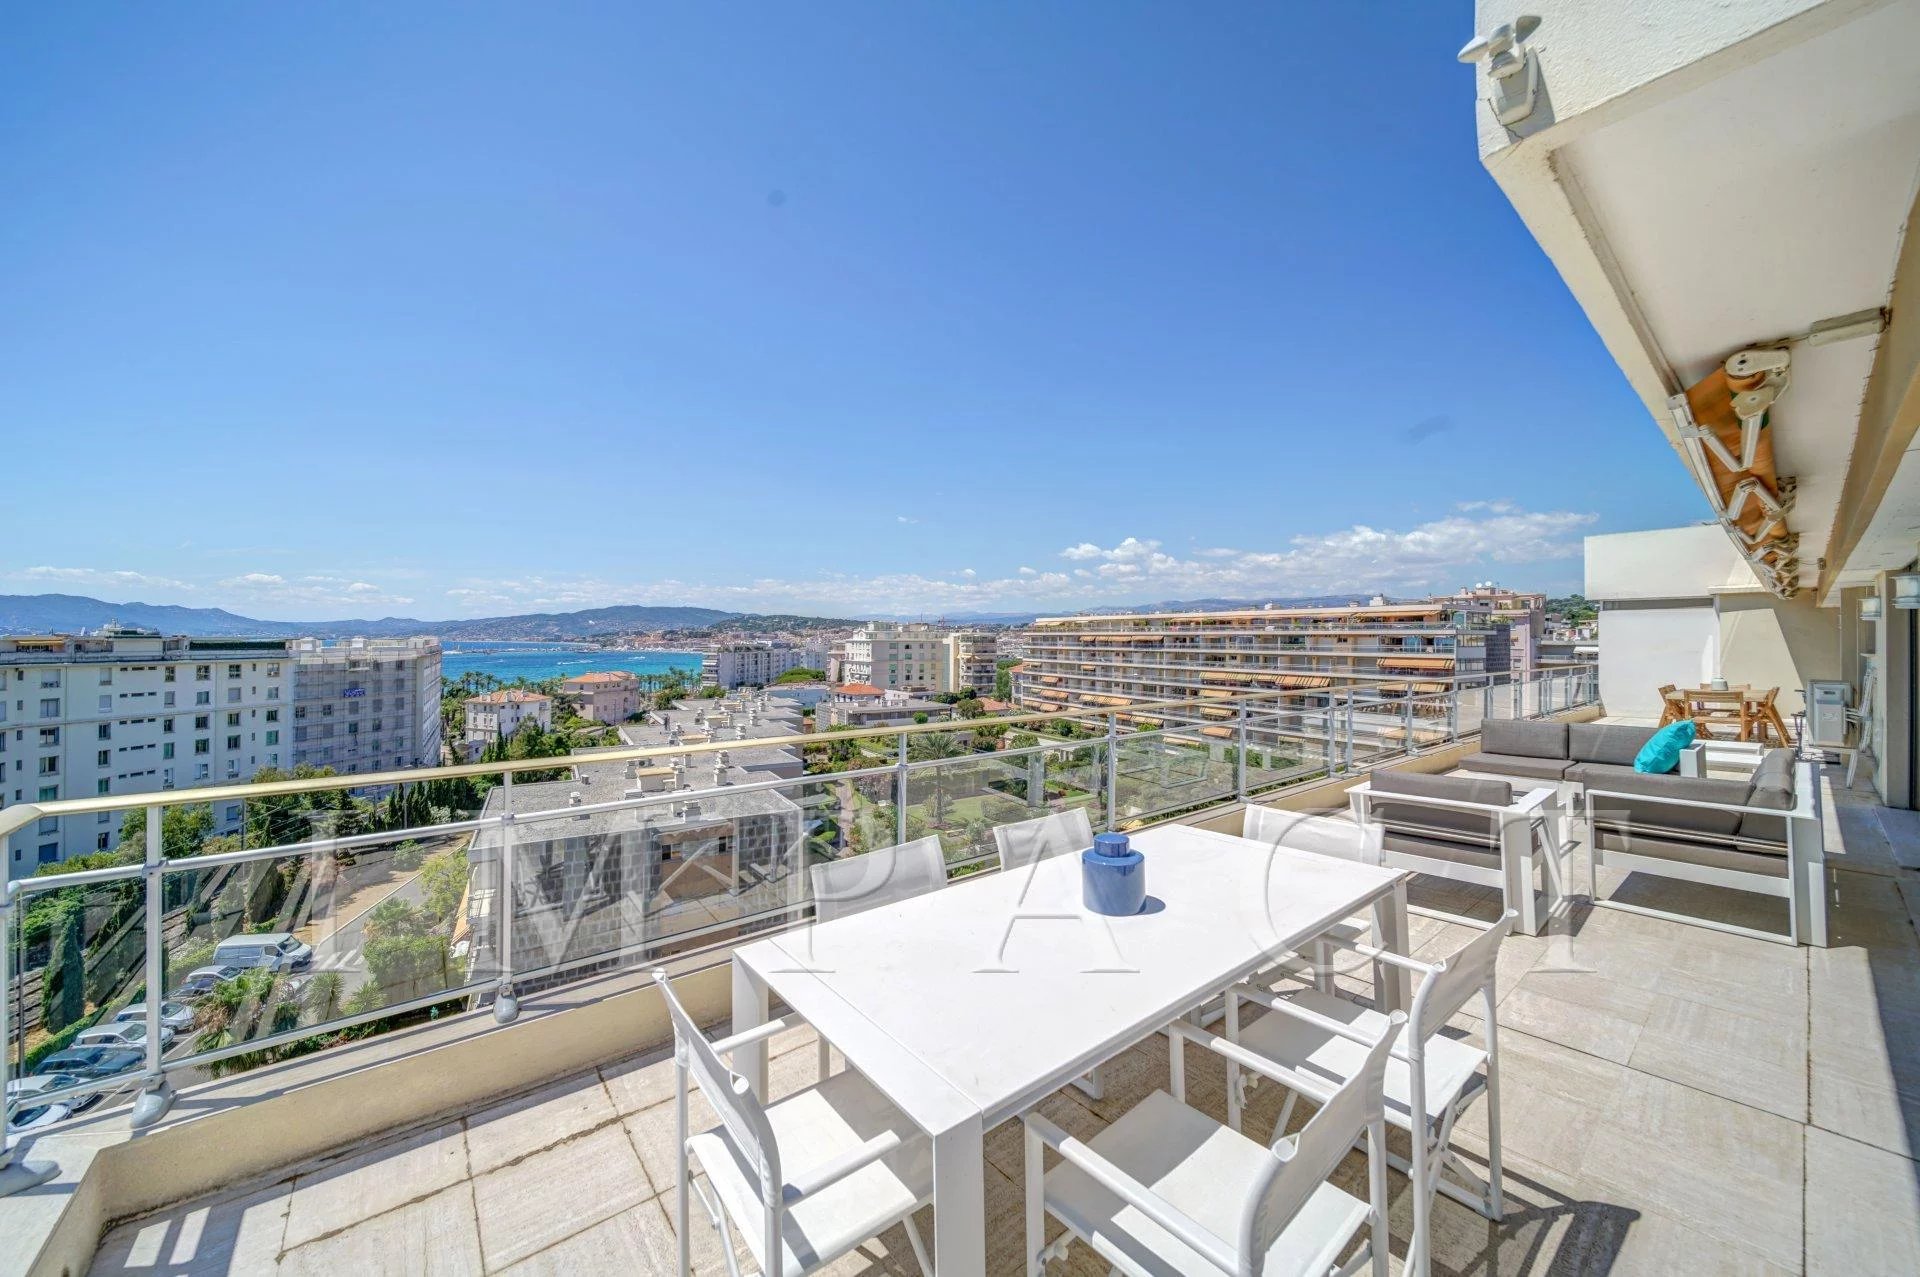 Penthouse to rent  entirely renovated in Cannes.